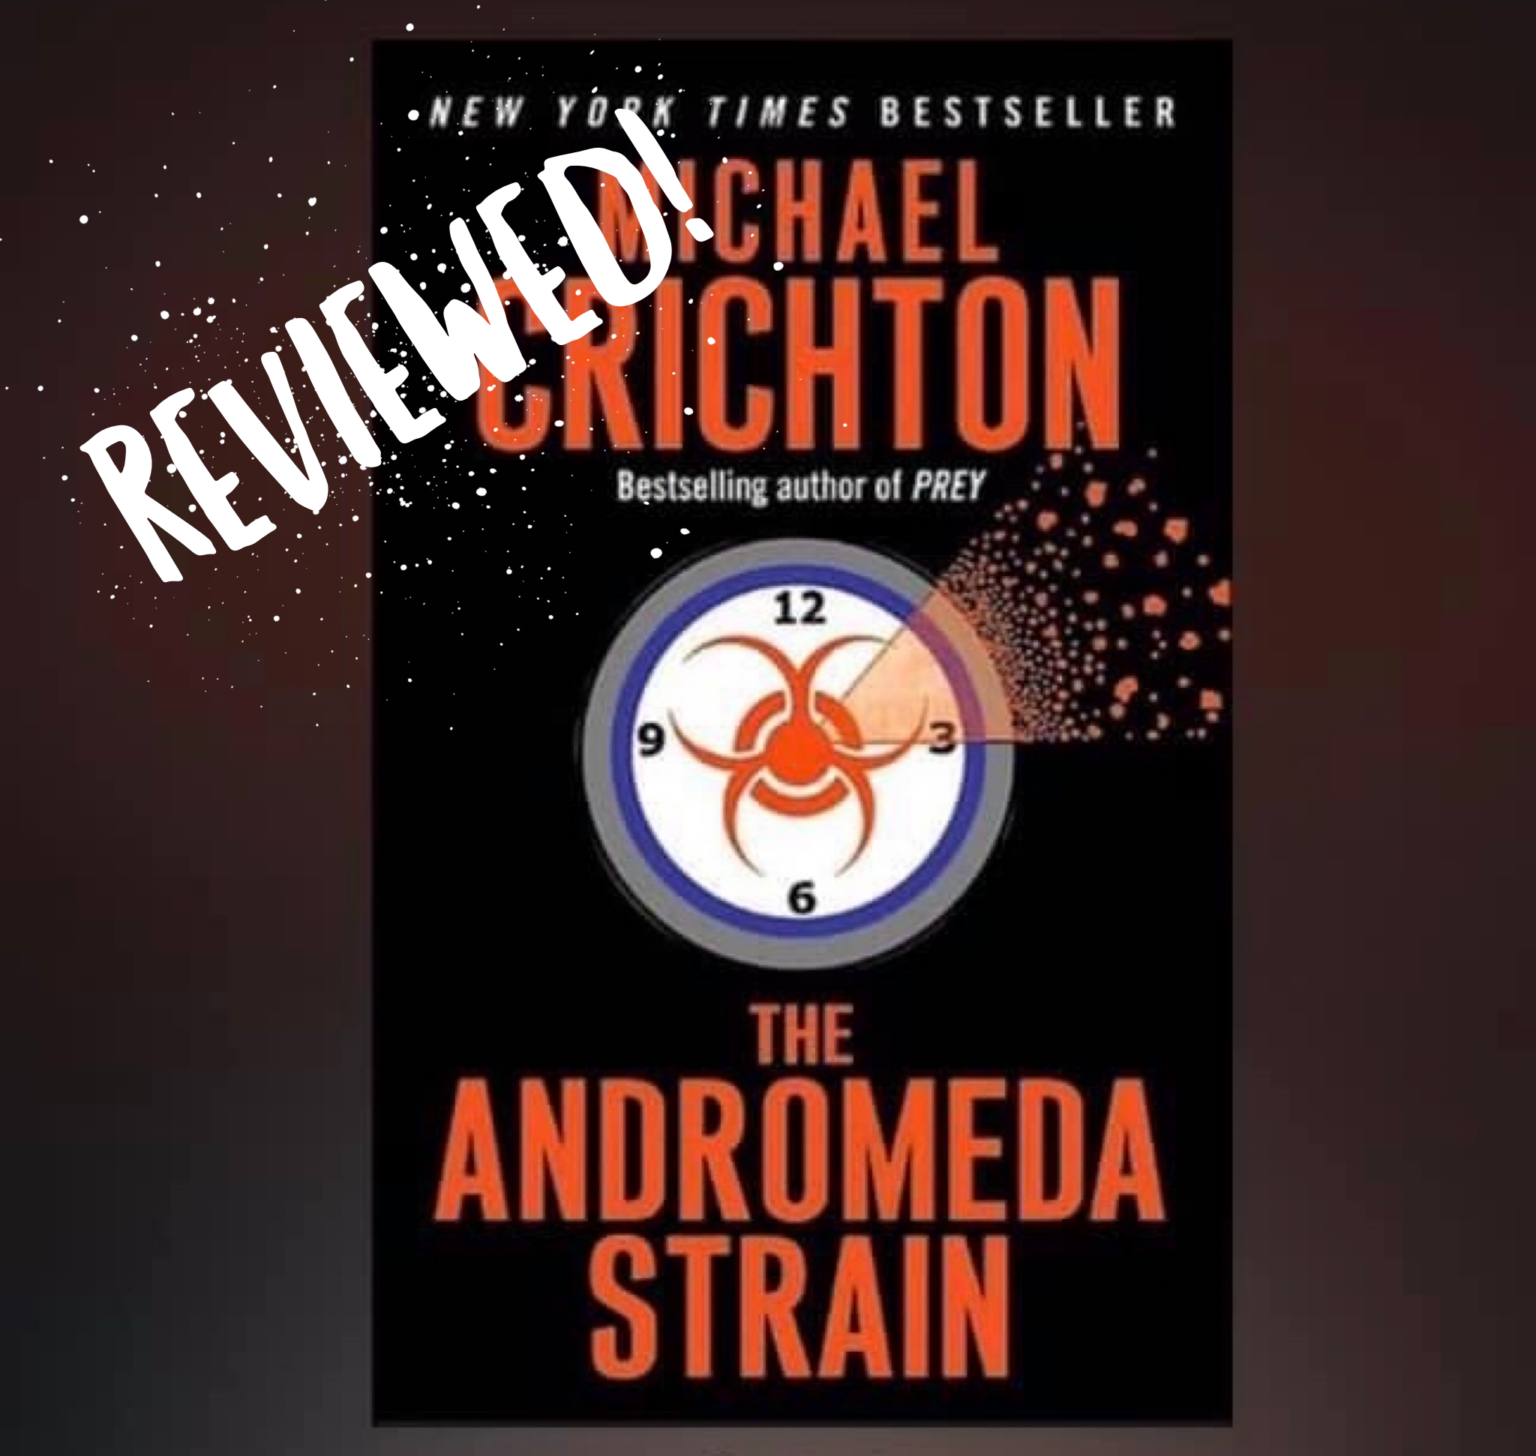 the andromeda strain by michael crichton